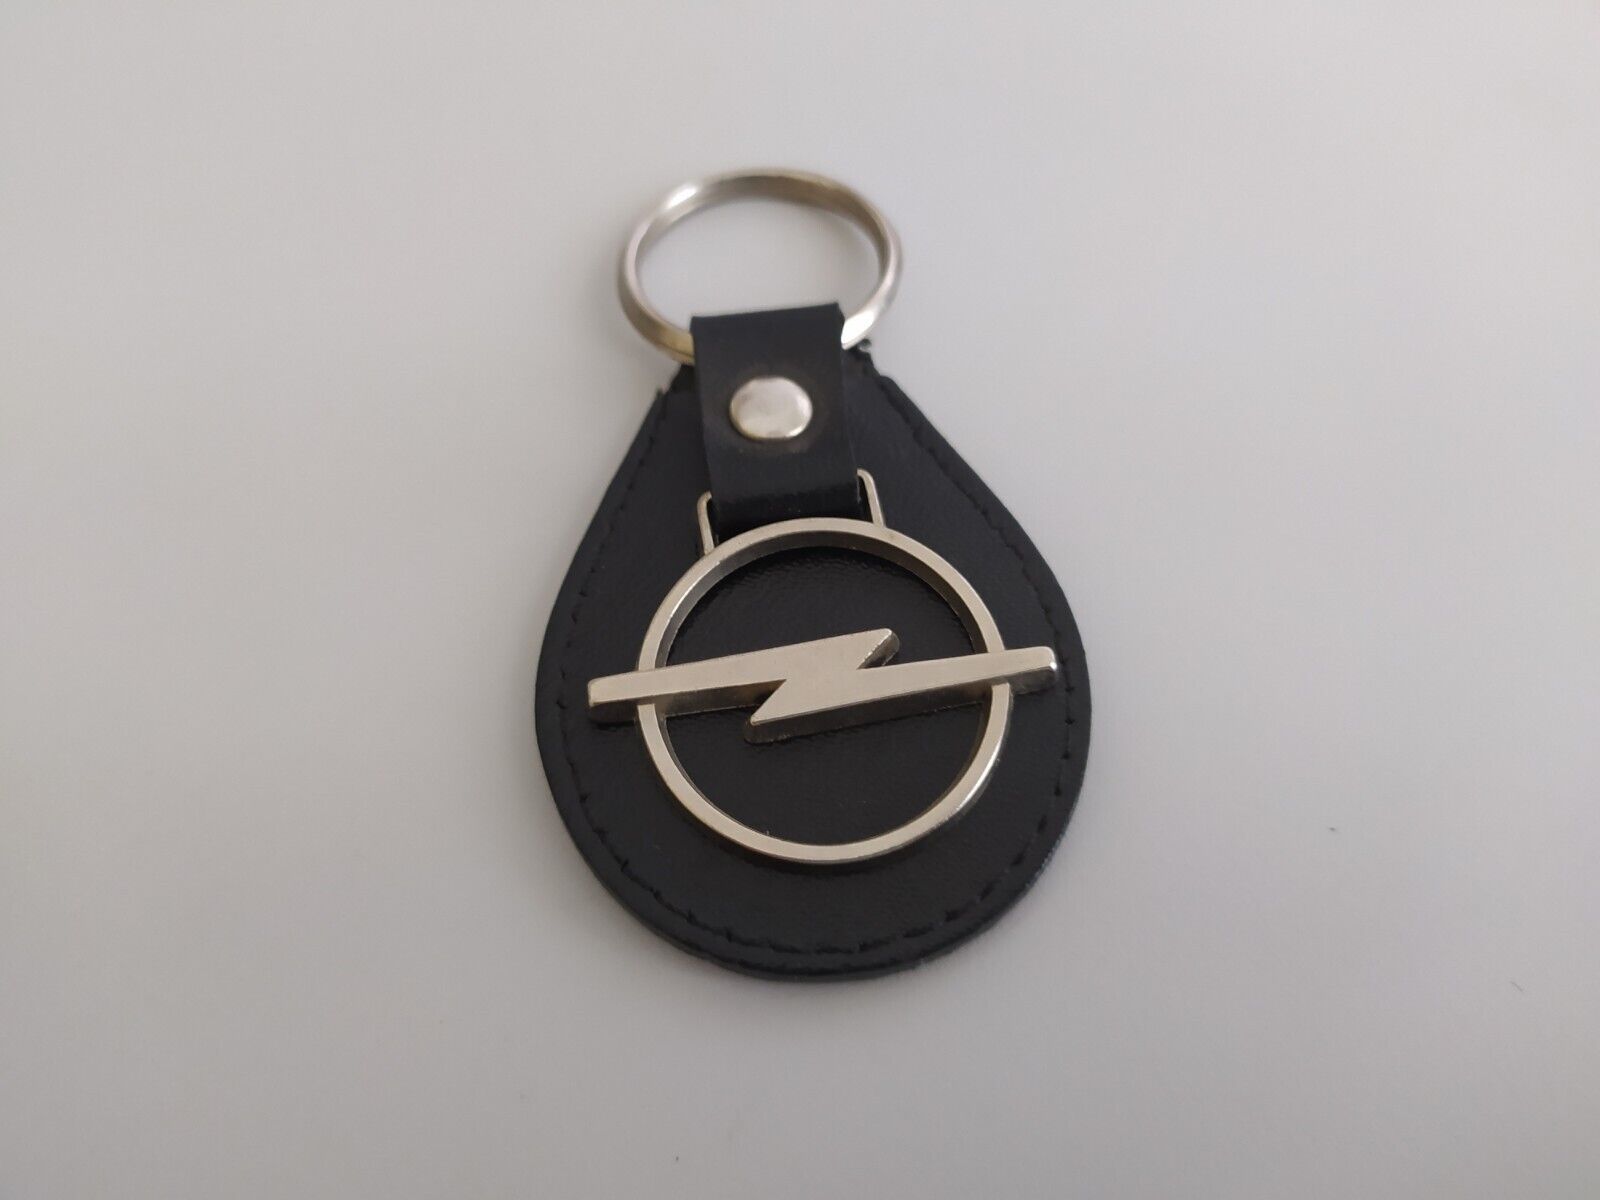 Opel GT/E Fahrer Keychain Stainless Steel brushed – DisagrEE